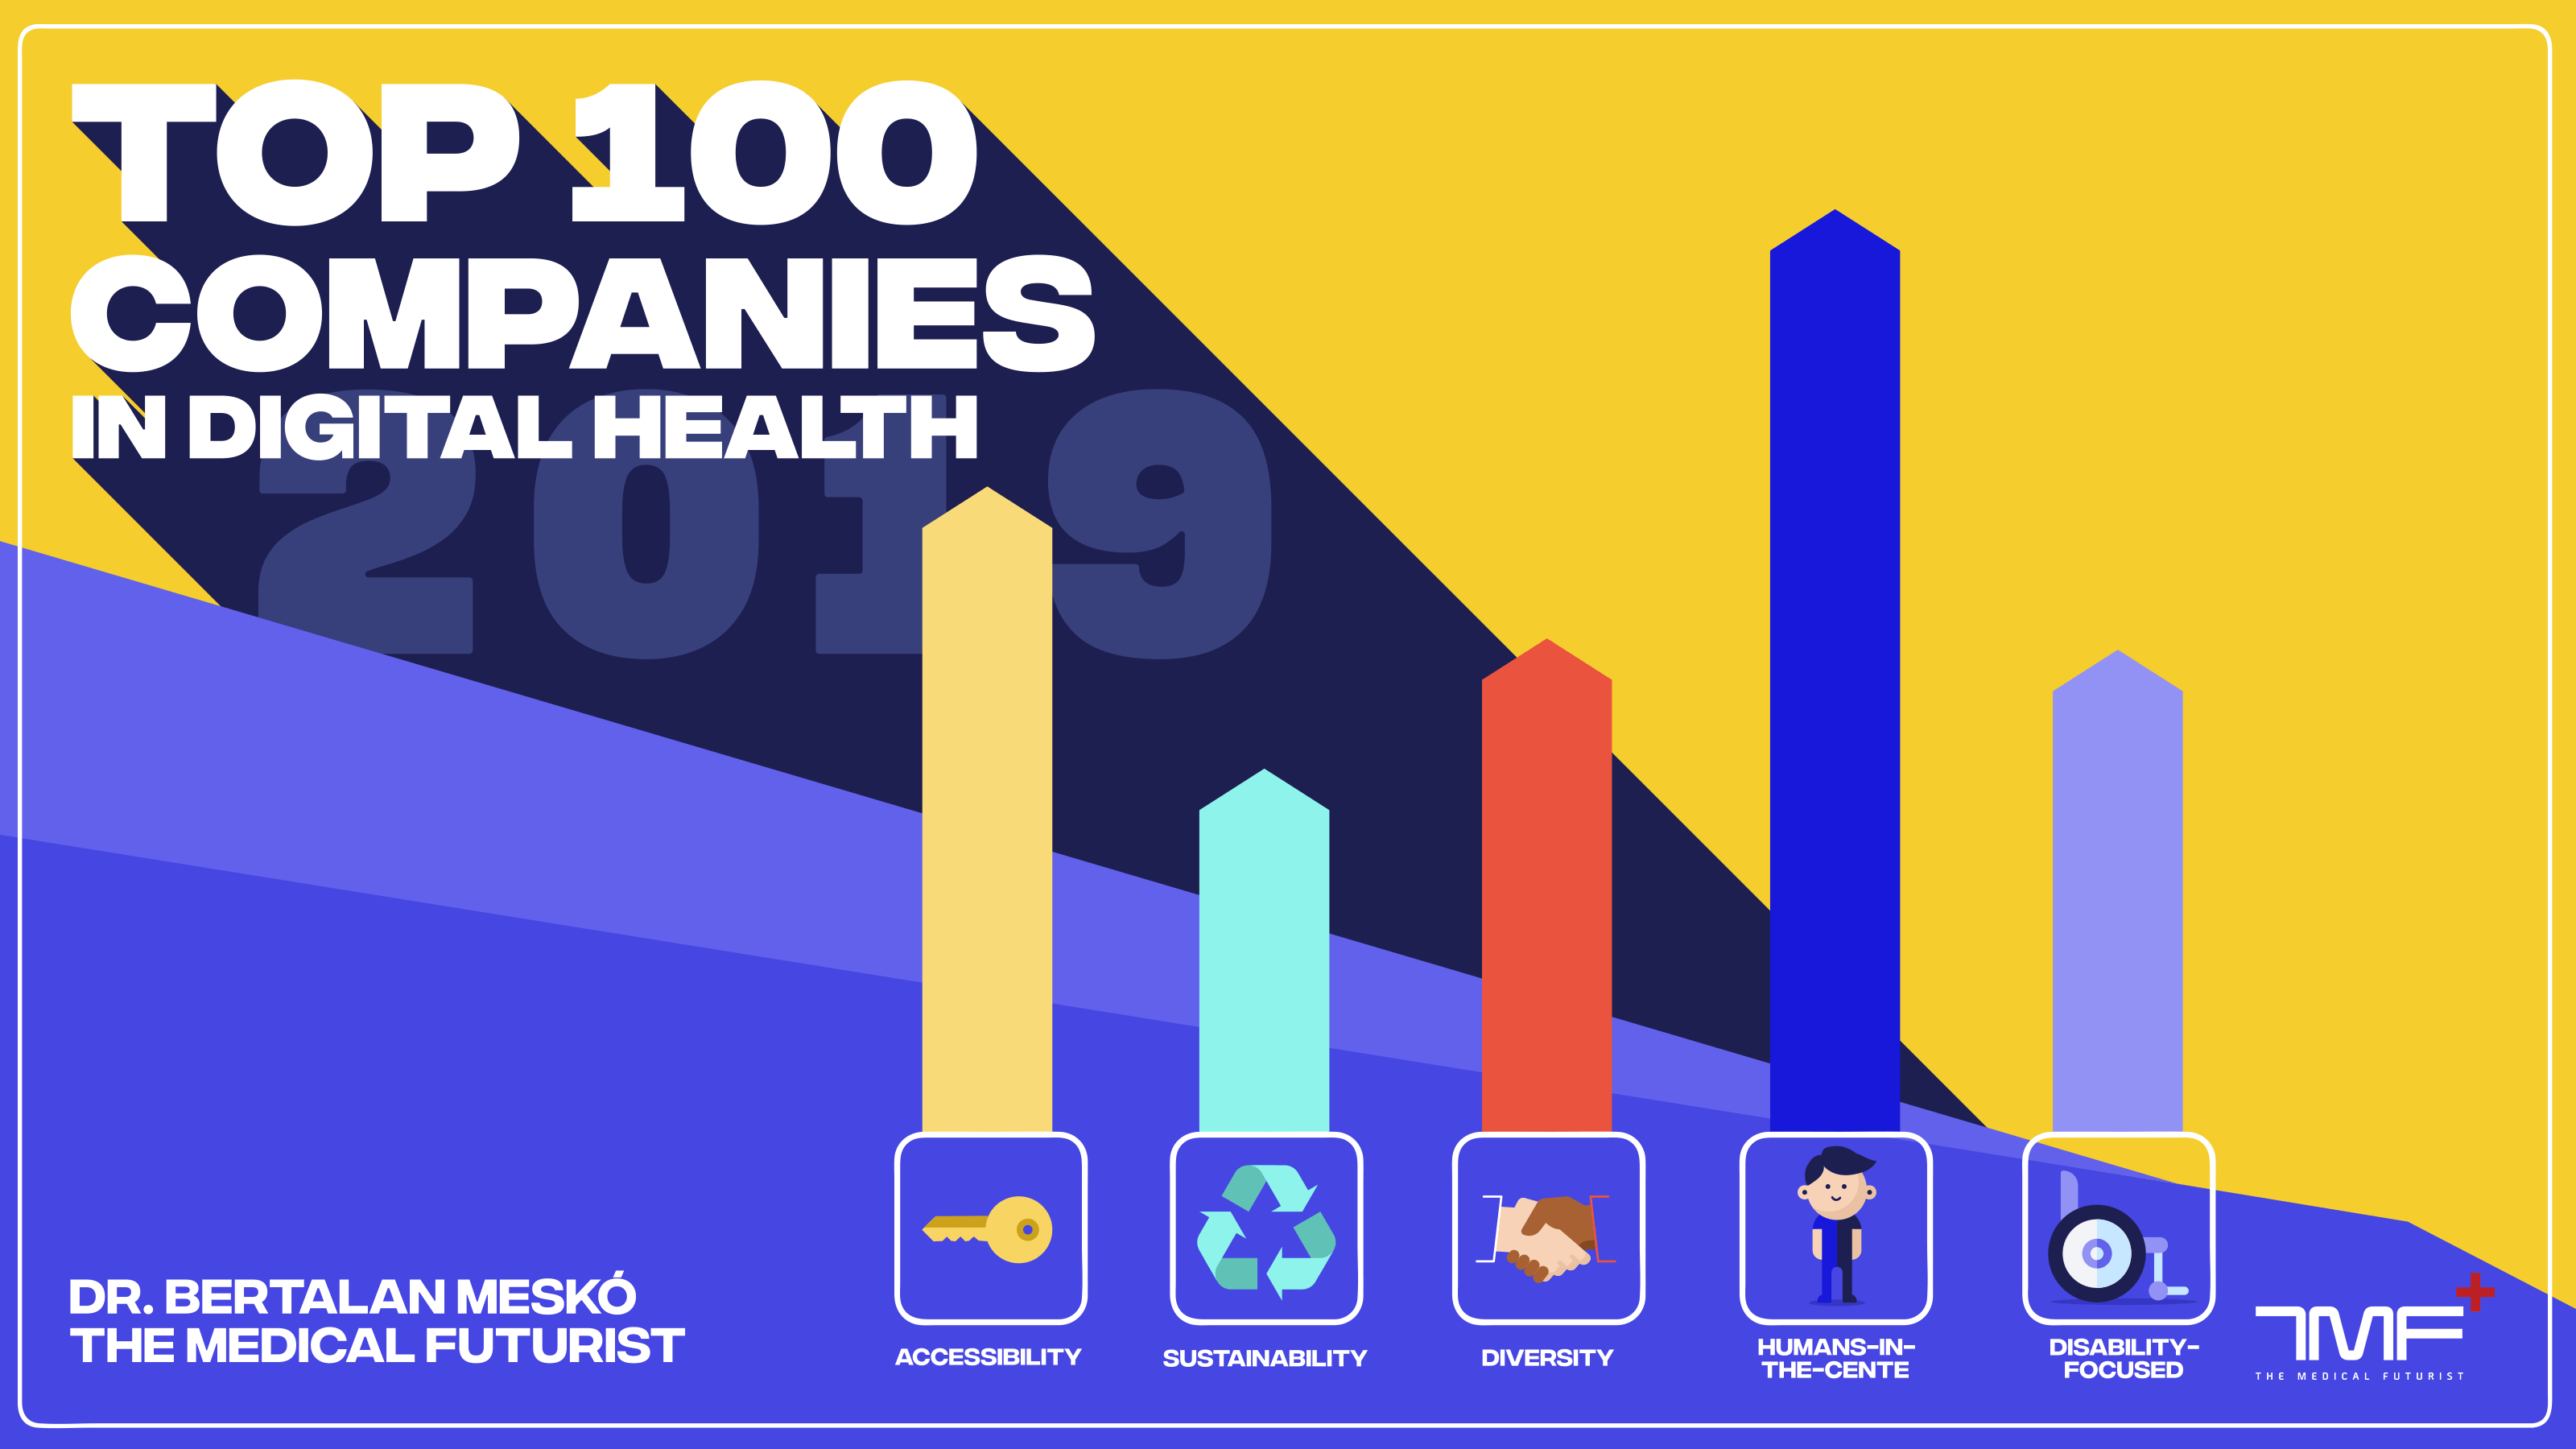 The Top 100 Companies In Digital Health Addressing Real-World Needs